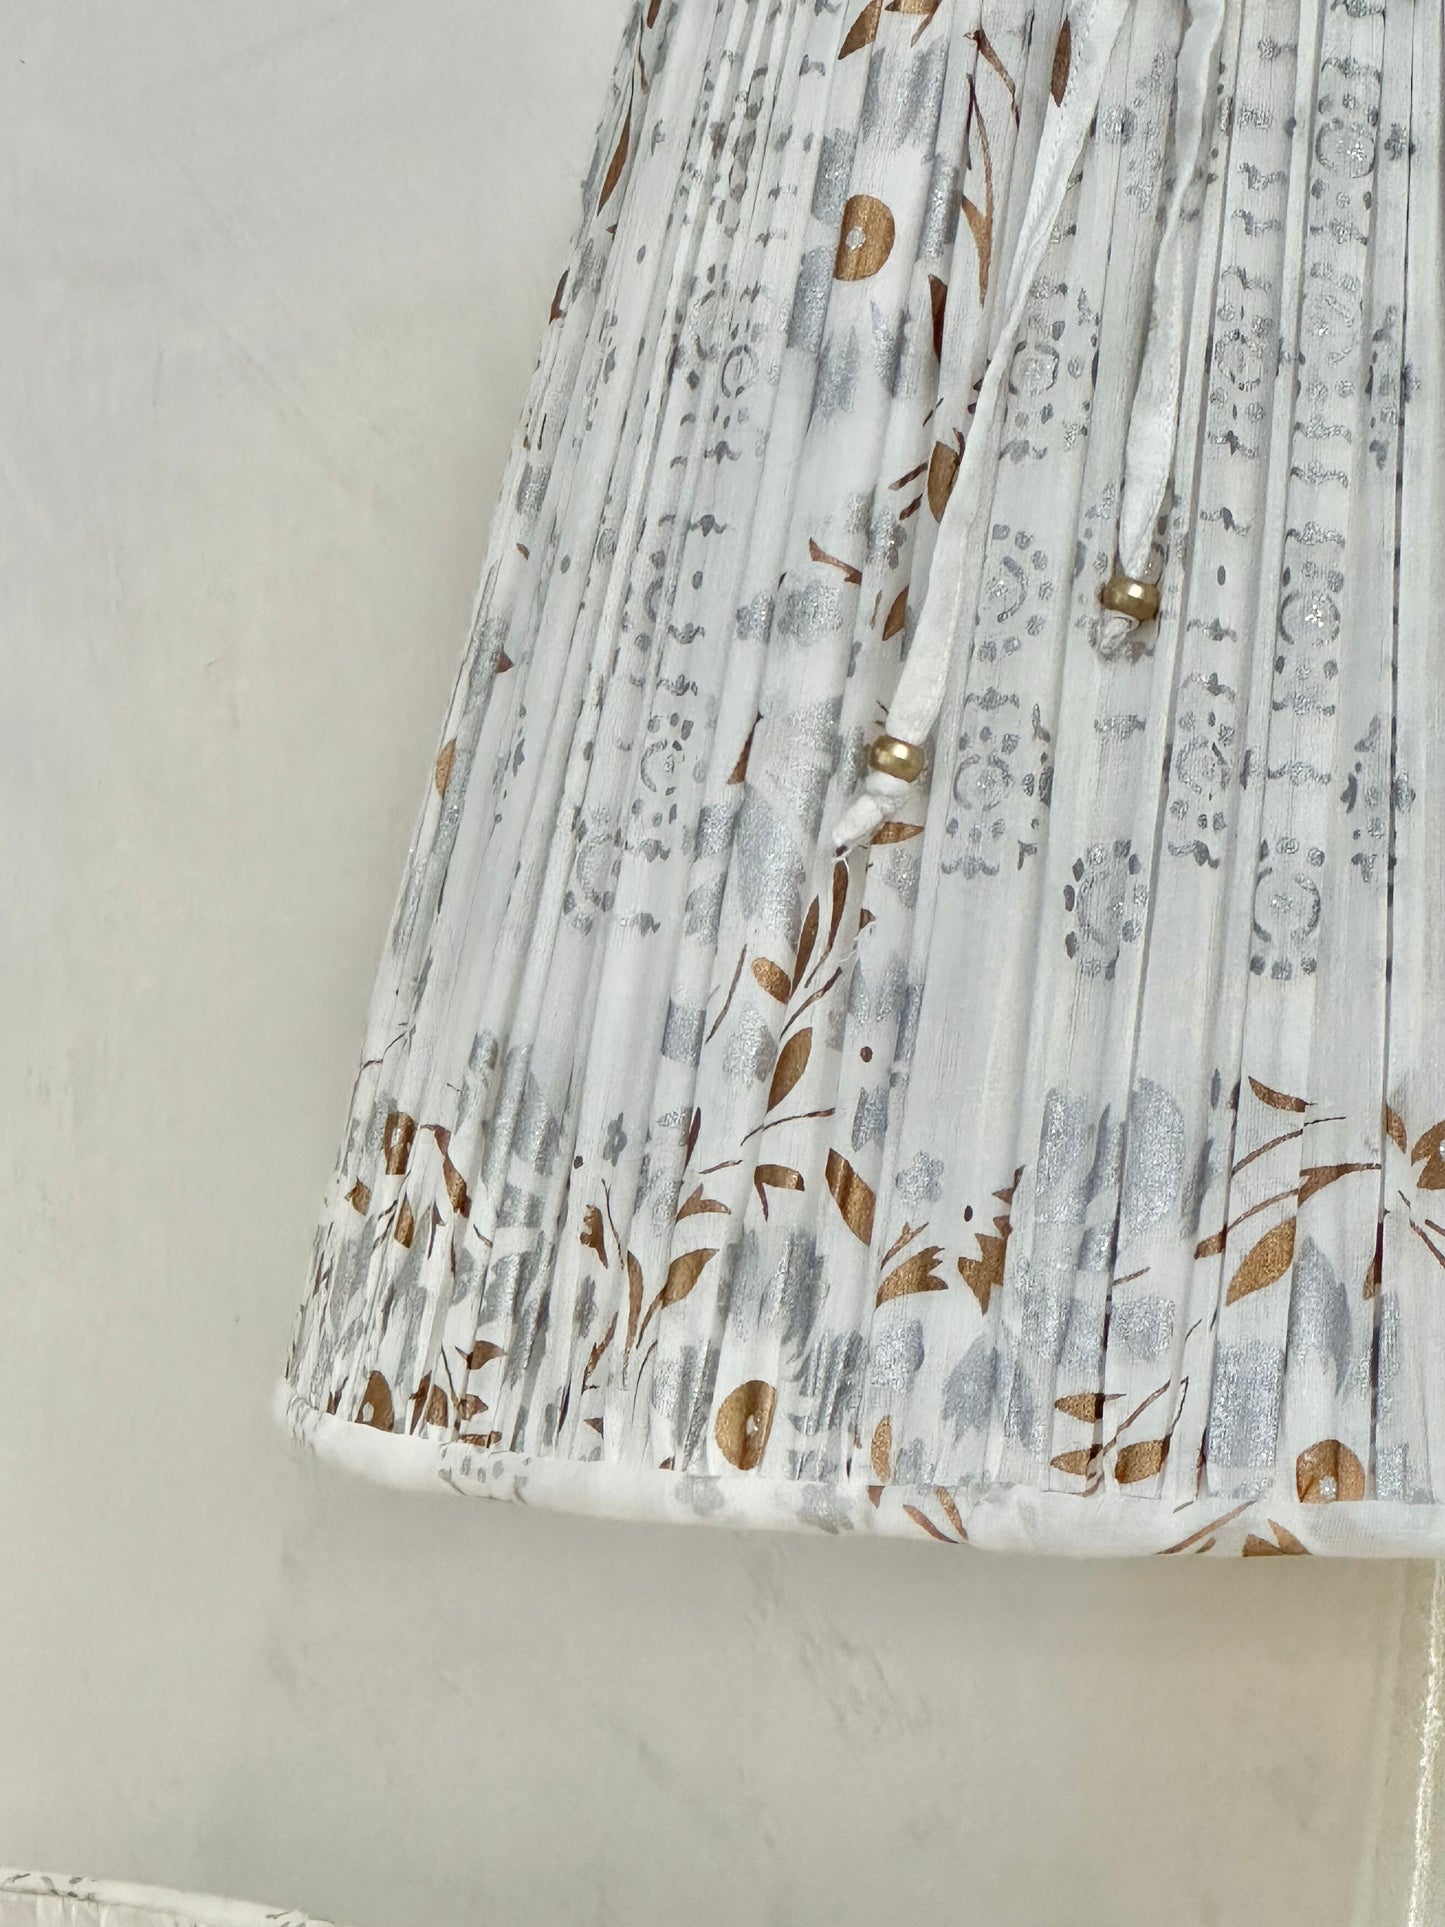 A pair of white, silver and gold sari lampshades